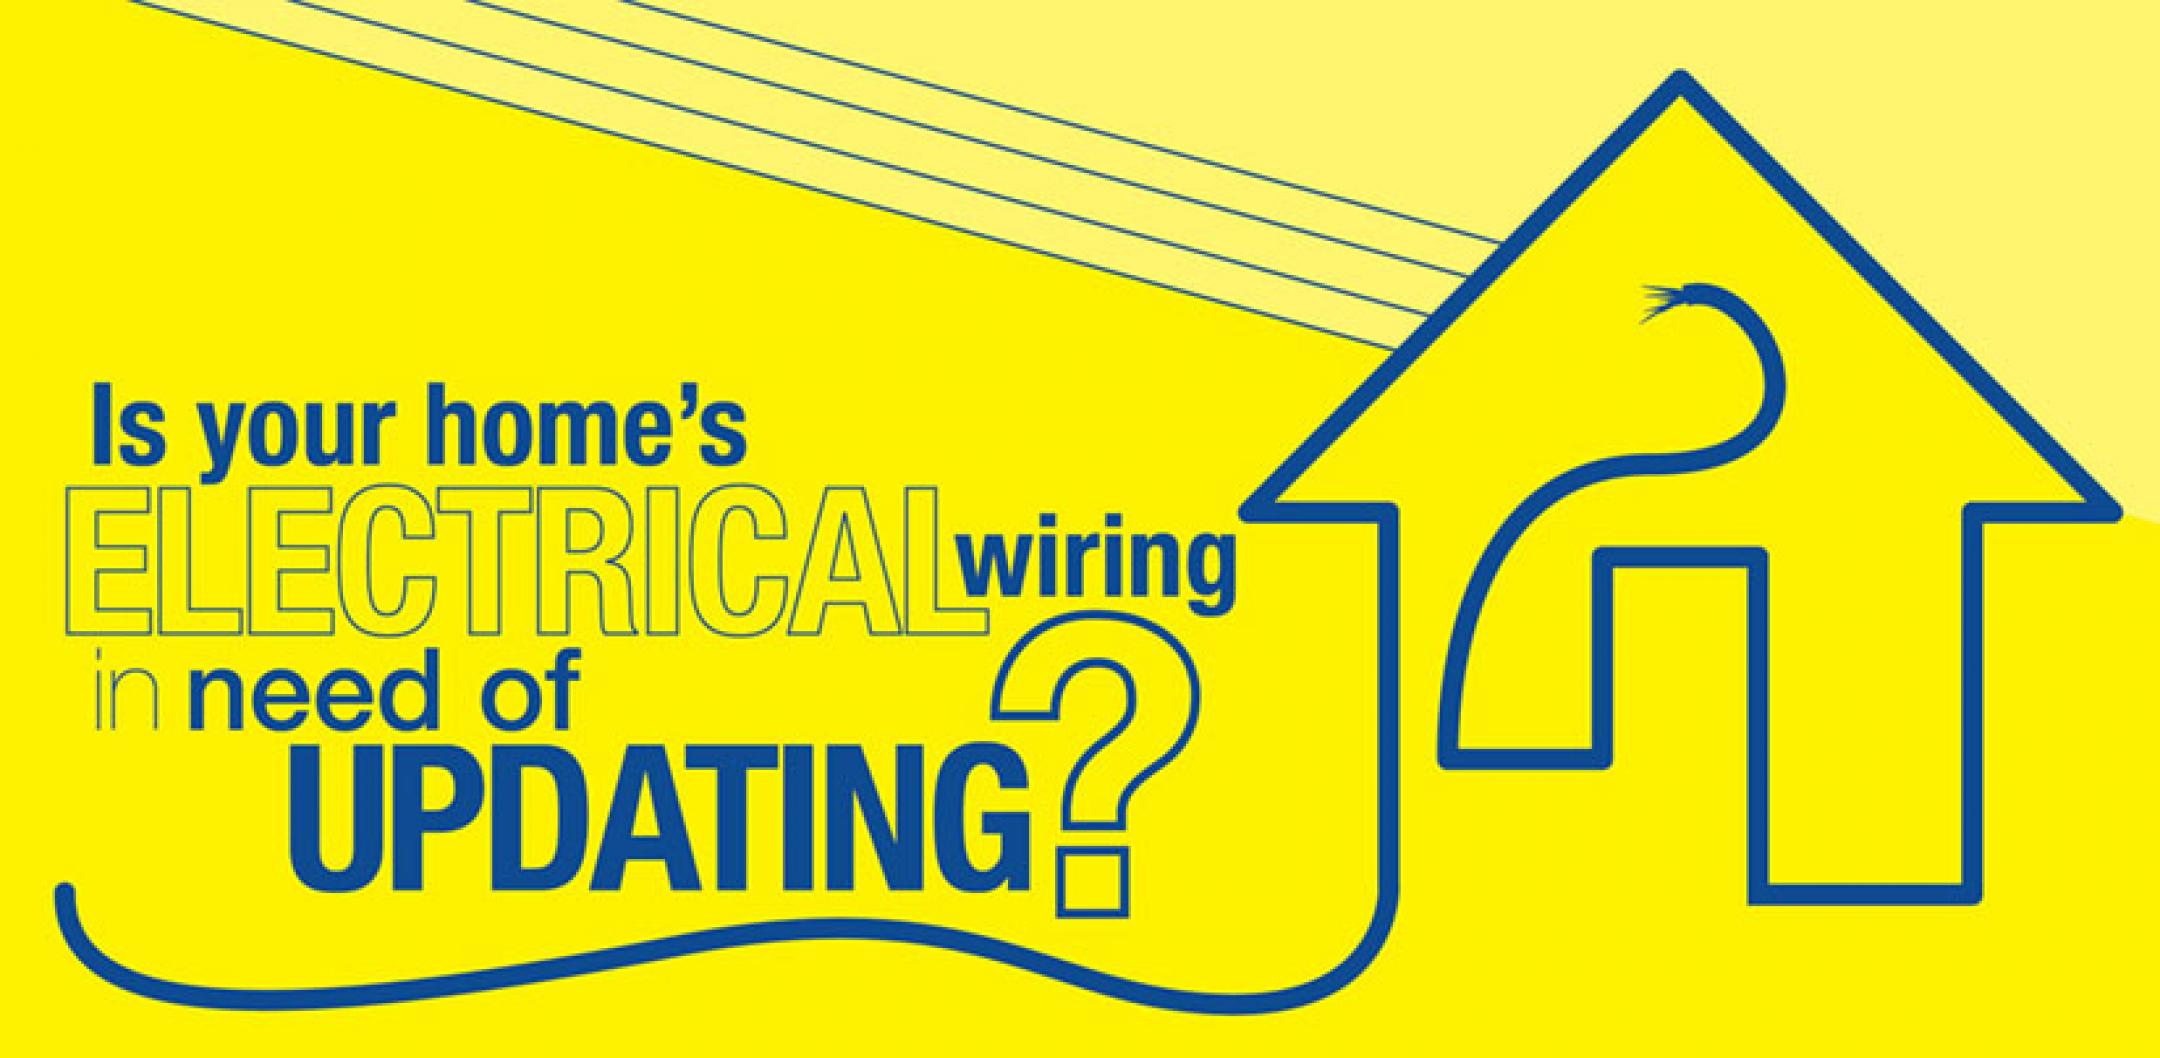 Is Your Home's Electrical Wiring in Need of Updating?